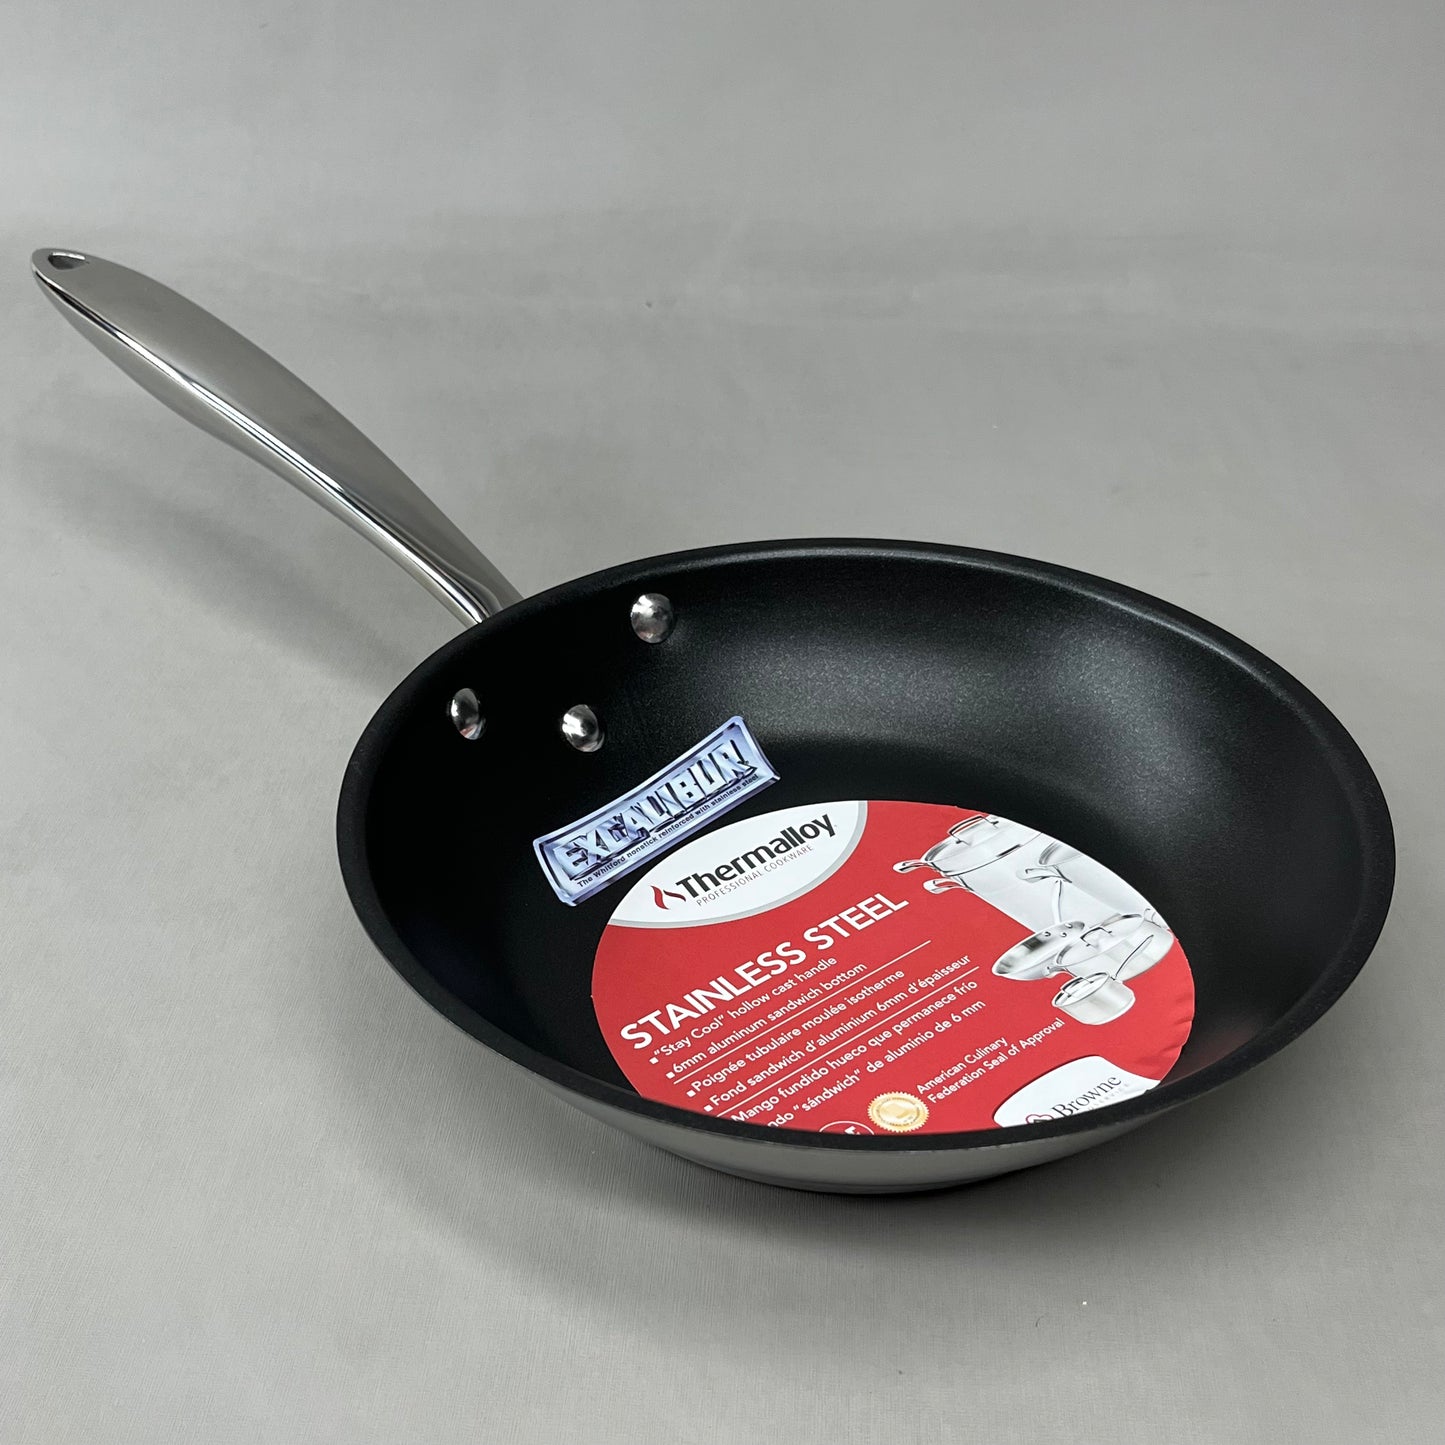 BROWNE Thermalloy Deluxe Fry Pan 8"x1.5" w/ Excalibur coating 5724058 (New)